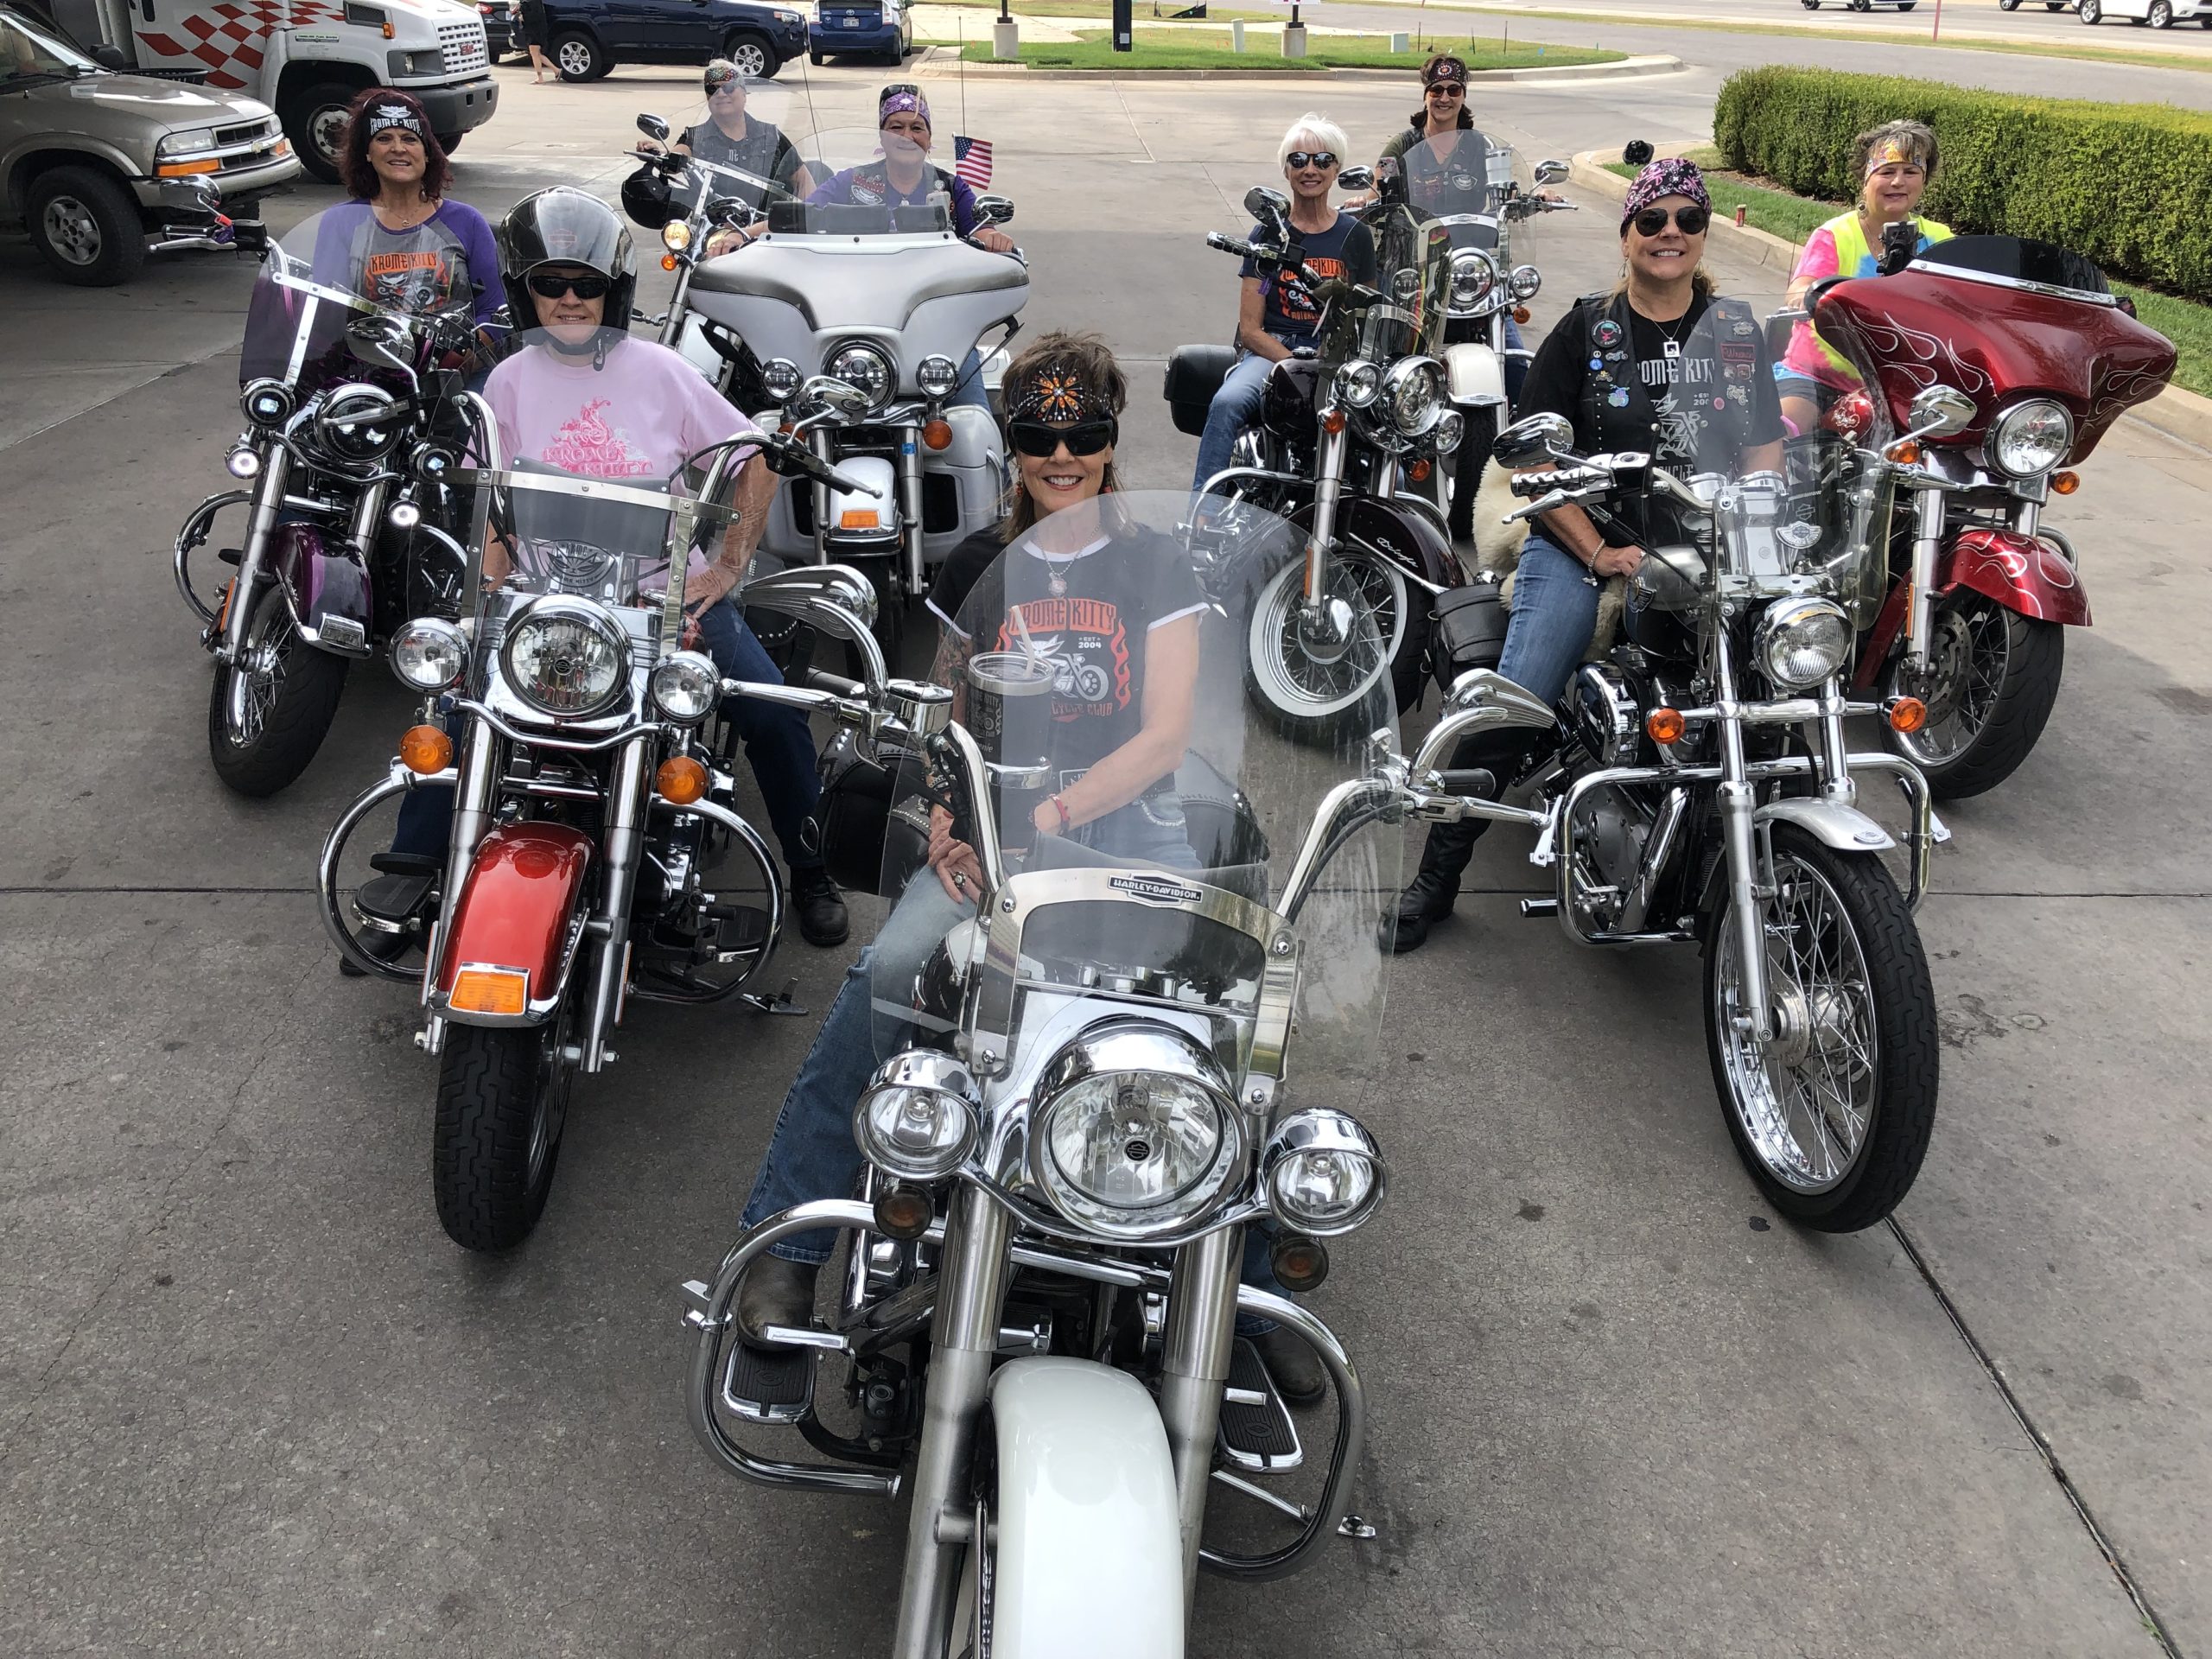 All-female biker club rides for fun and friendship - The Active Age